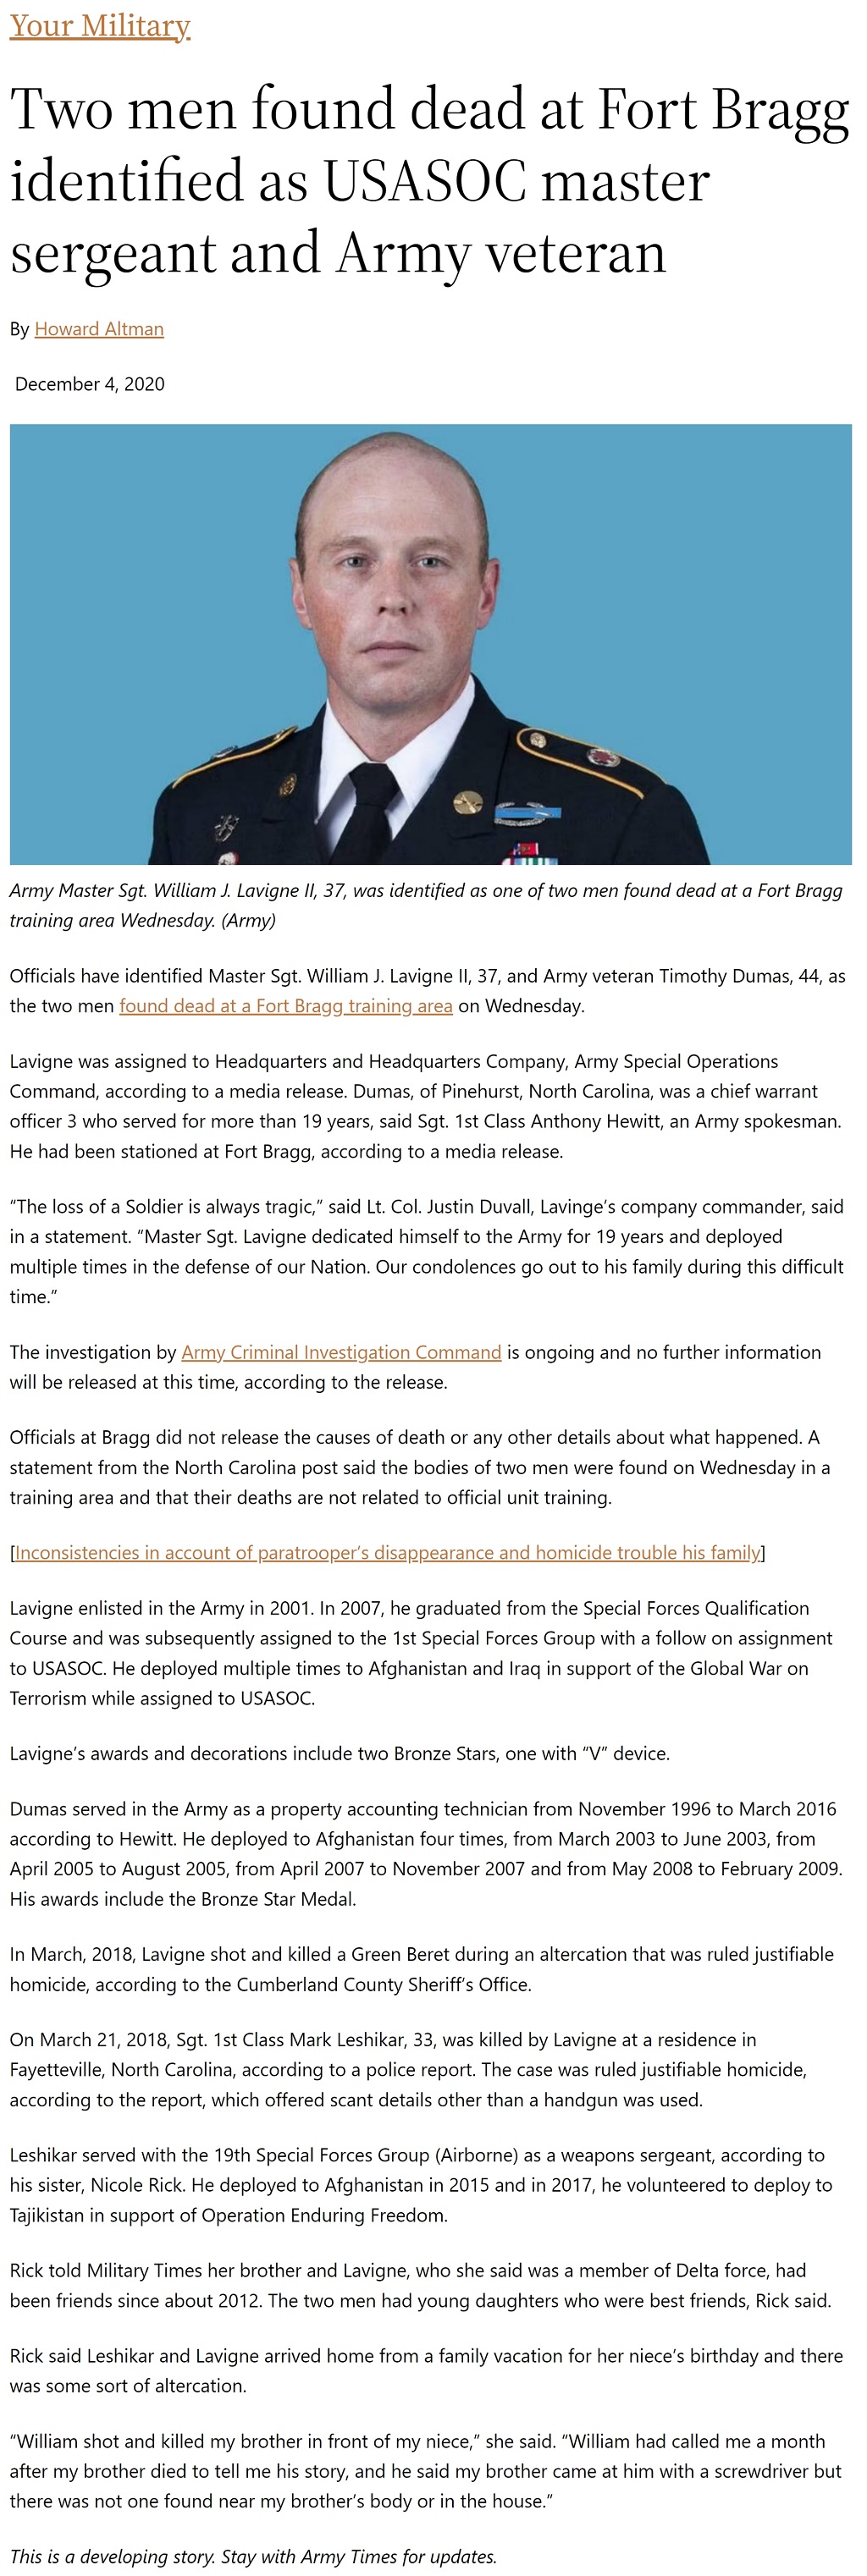 Two men found dead at Fort Bragg identified as USASOC master sergeant and Army veteran by Howard Altman, Military Times 12/4/2020